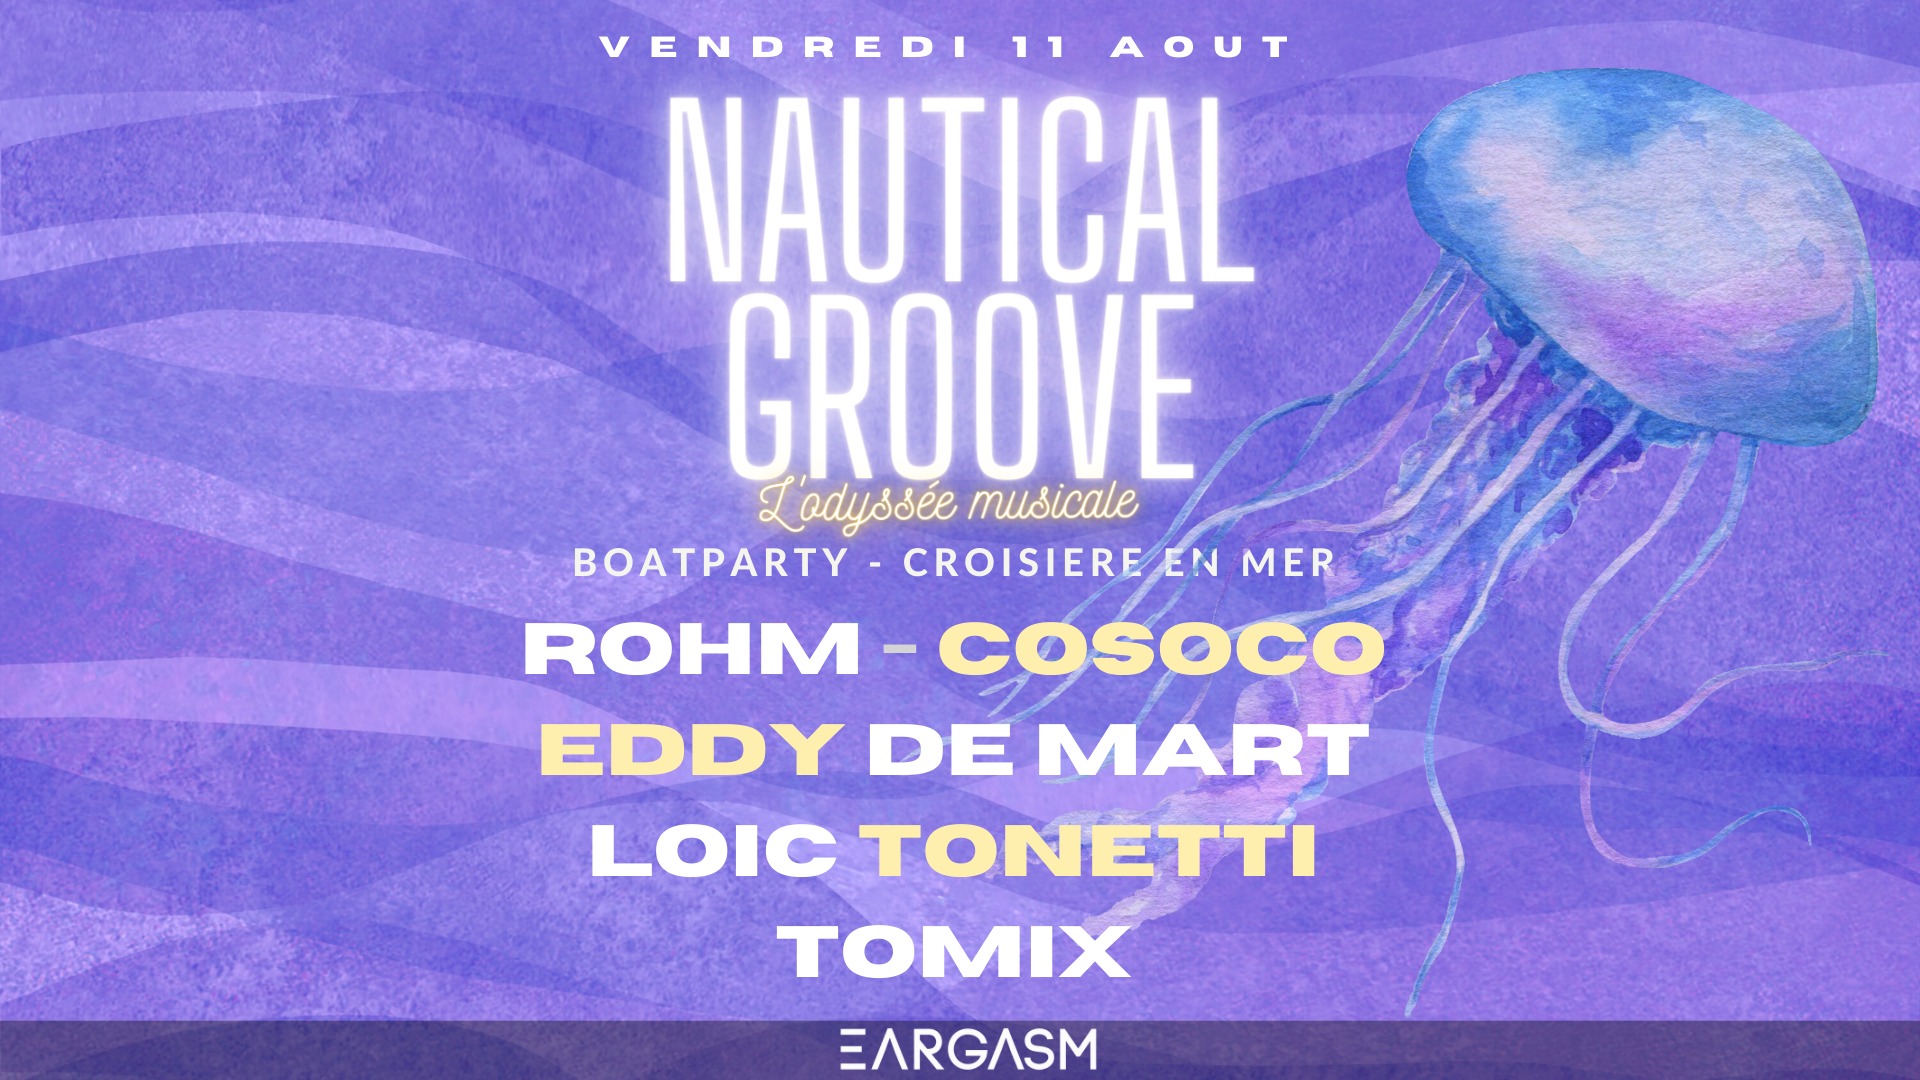 Boat party marseille